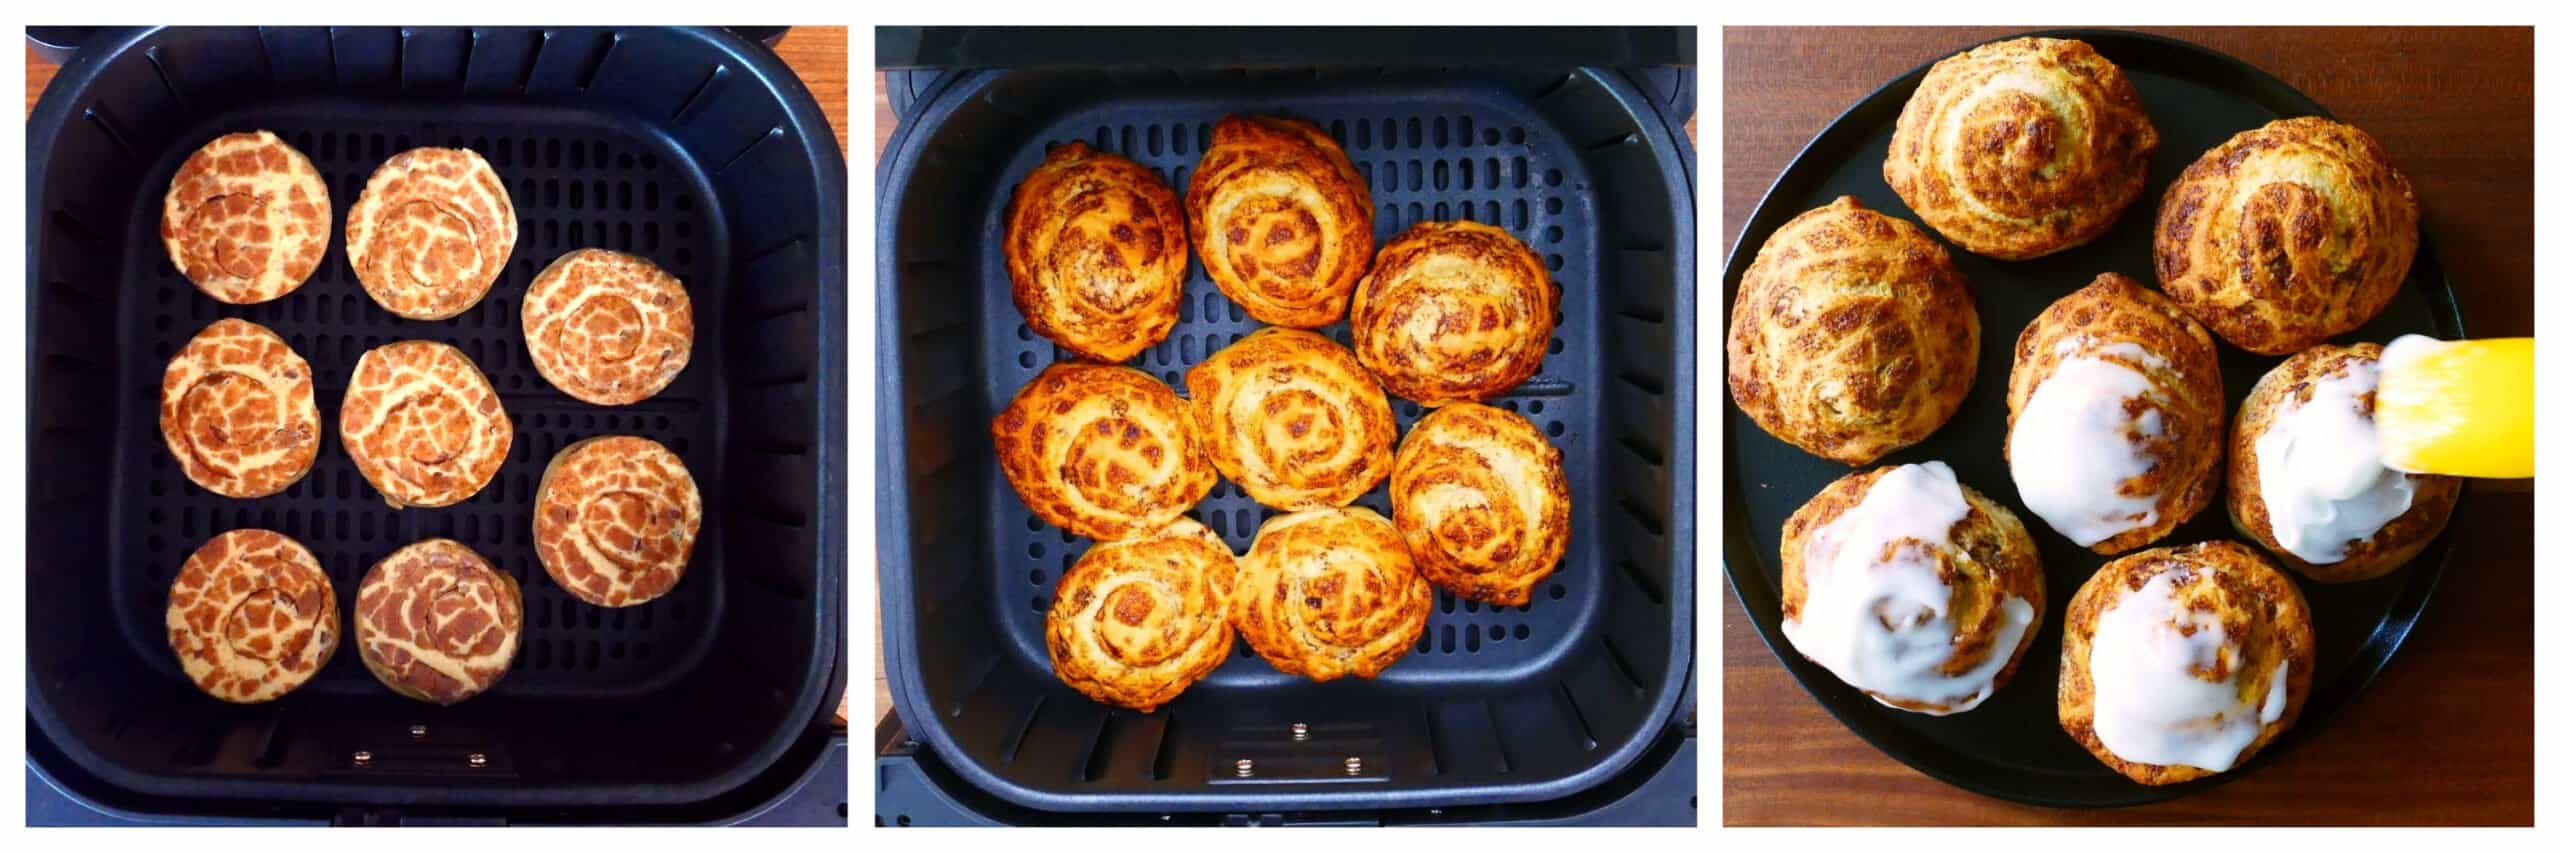 Air fryer cinnamon rolls refrigerated in basket, cooked, iced